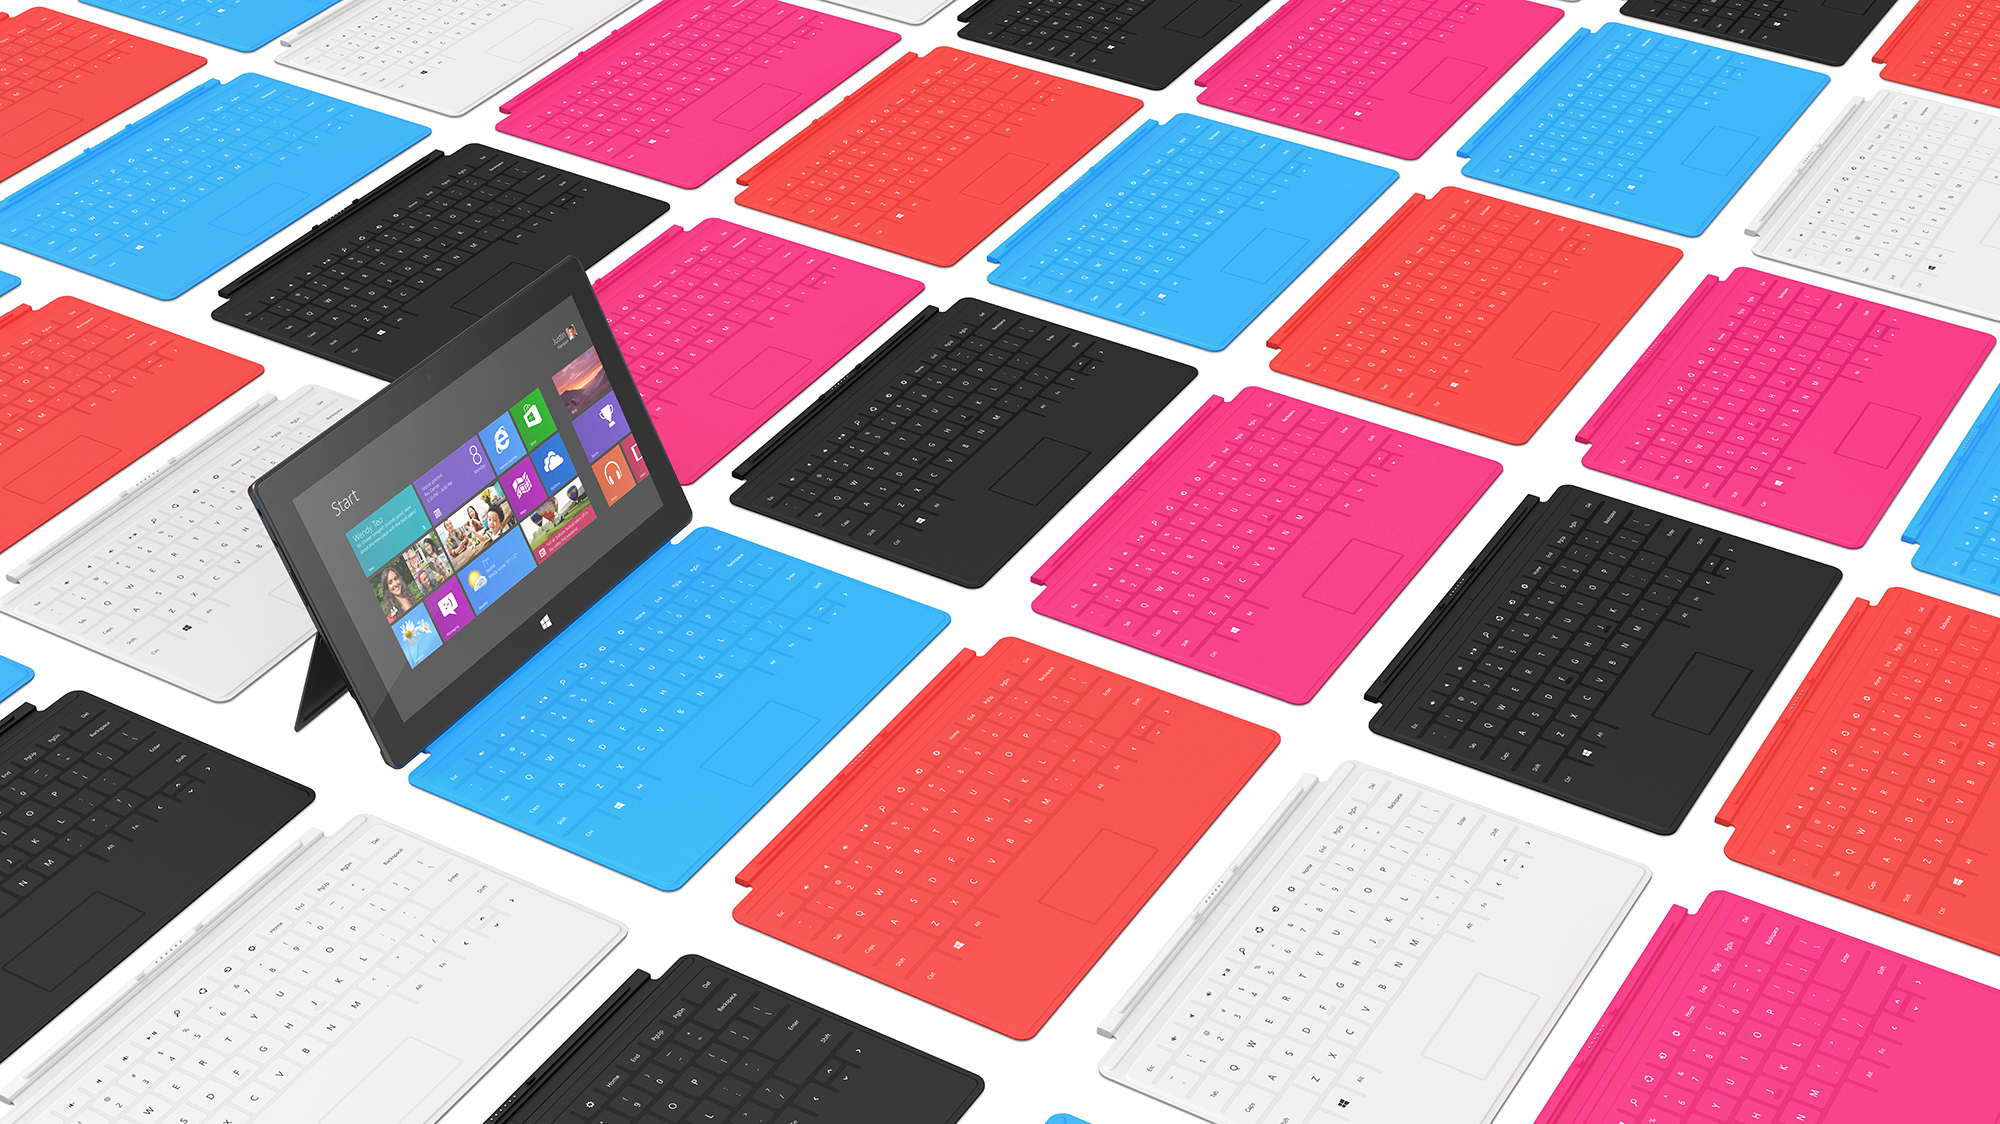 surface-touch-covers